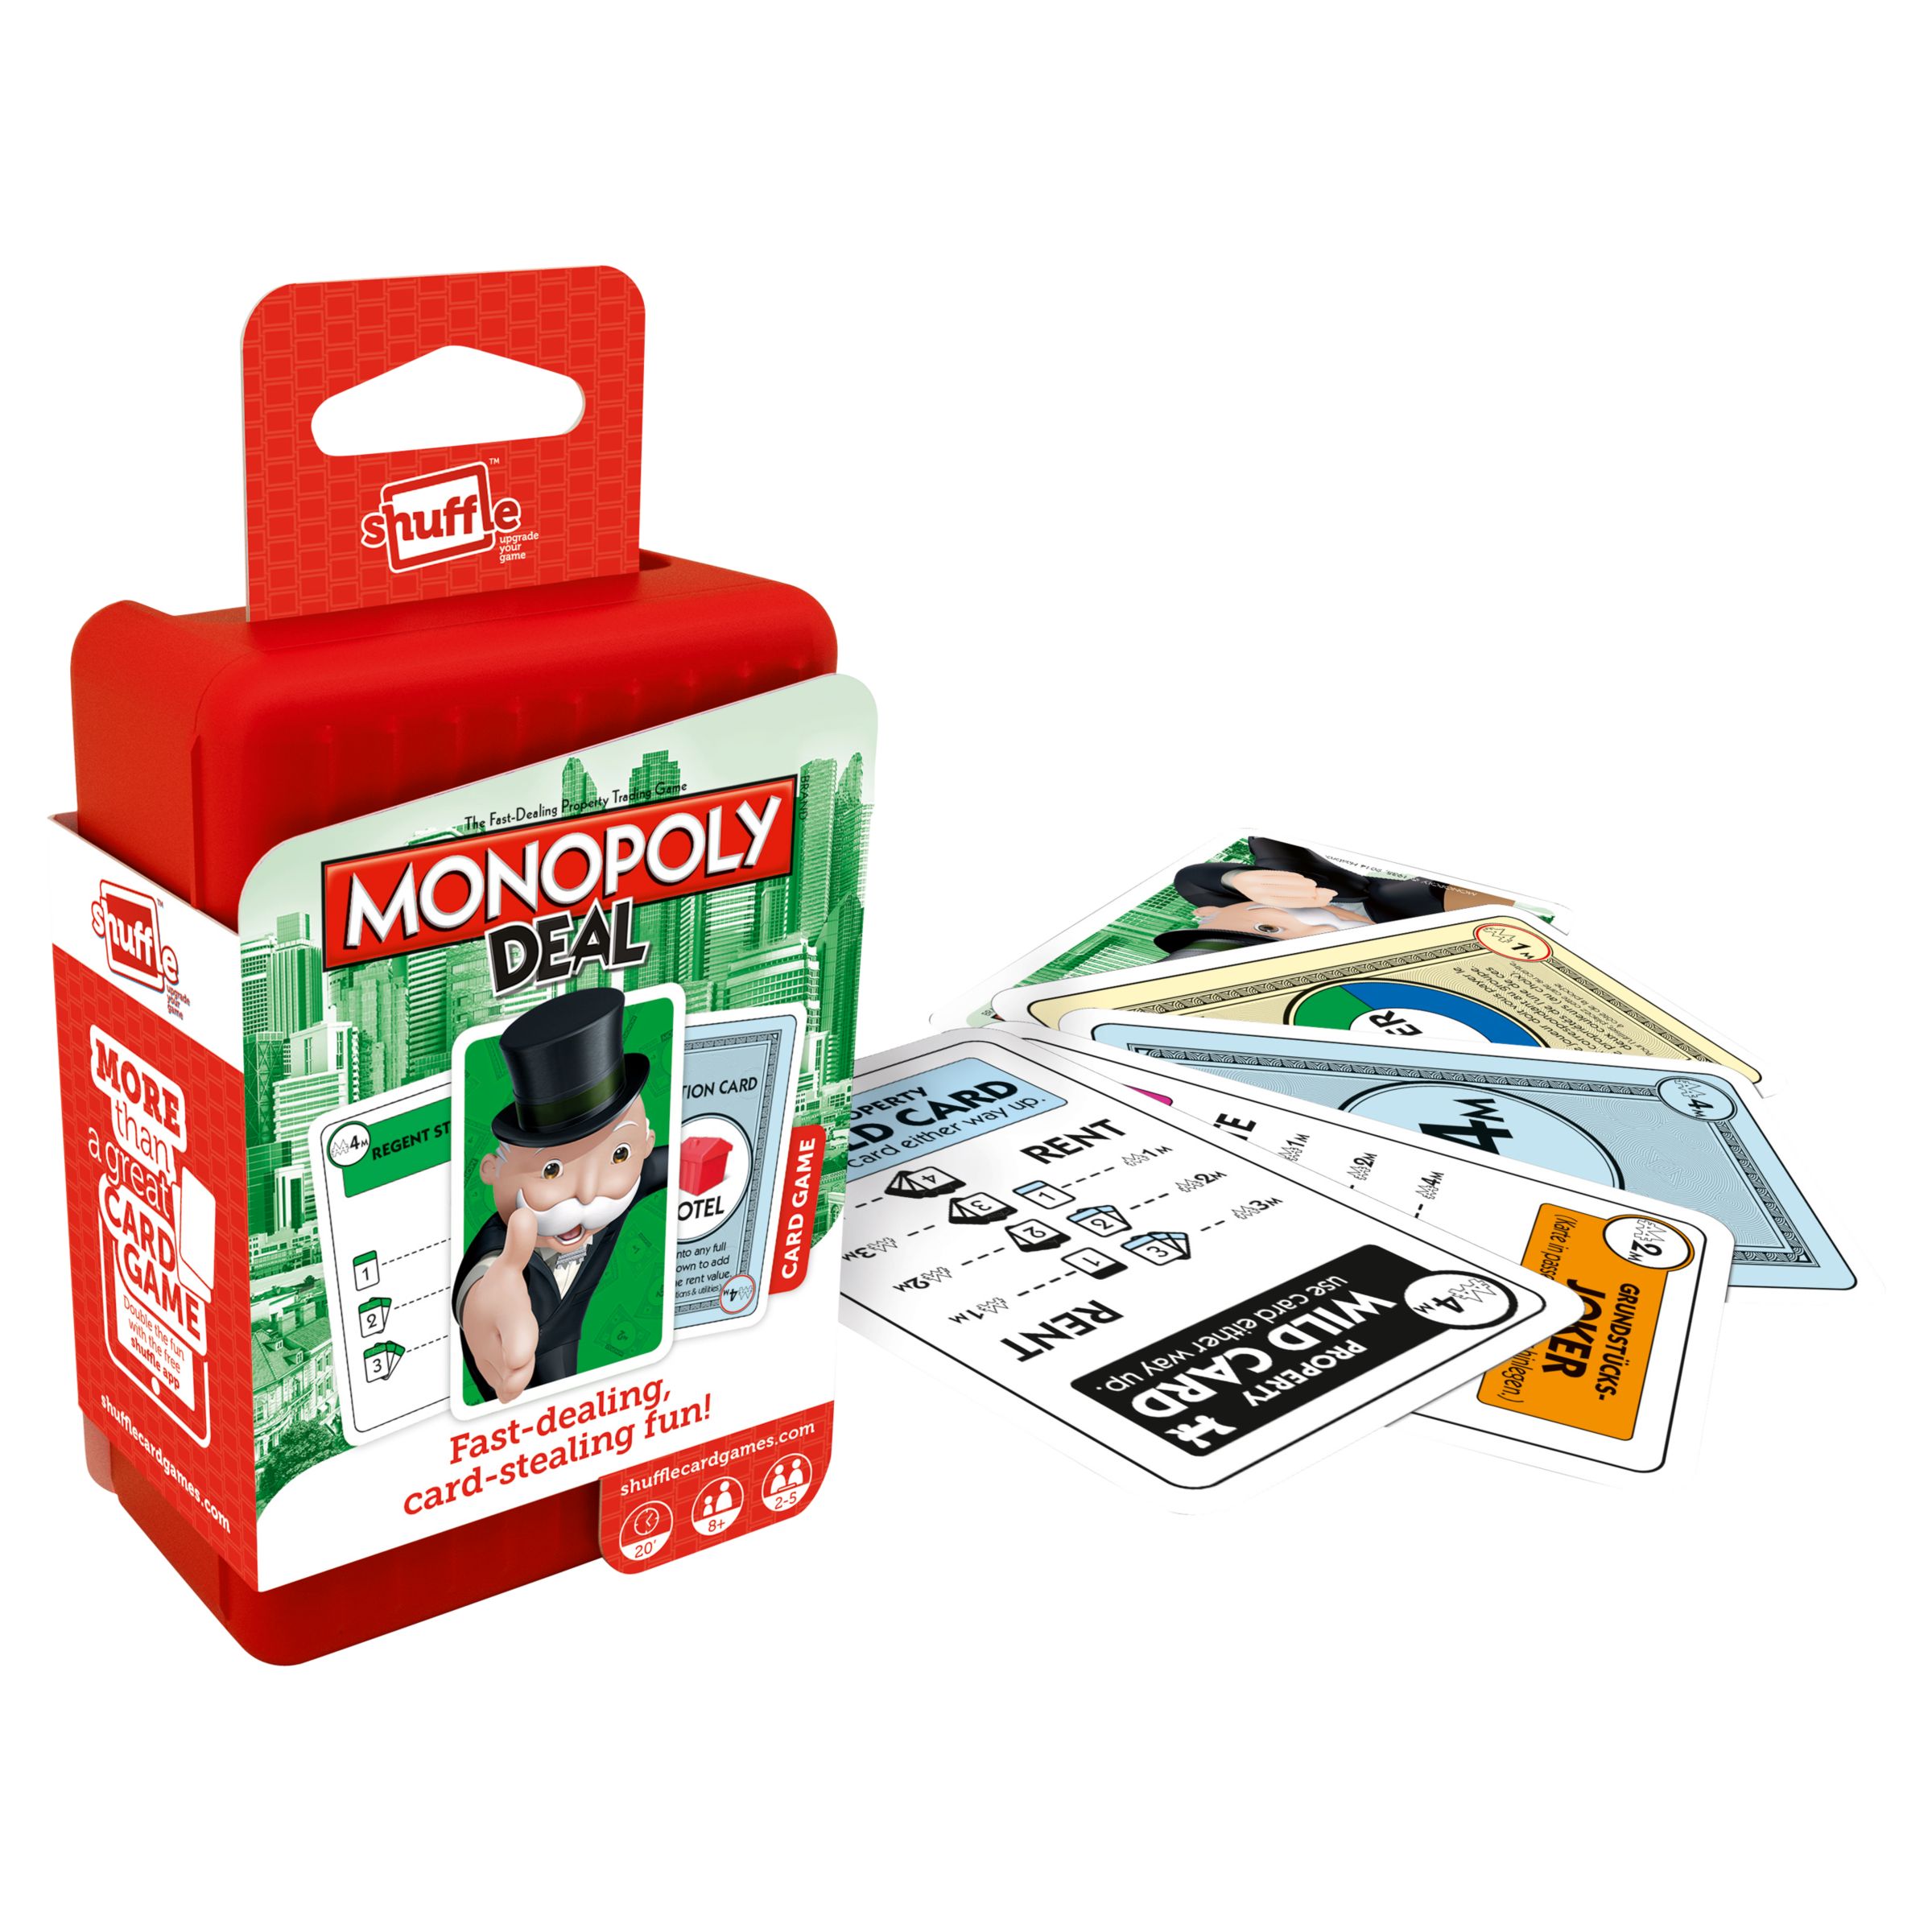 Monopoly Deal Monopoly Brand Deal Card Game UK LONDON Version Fun Family Game